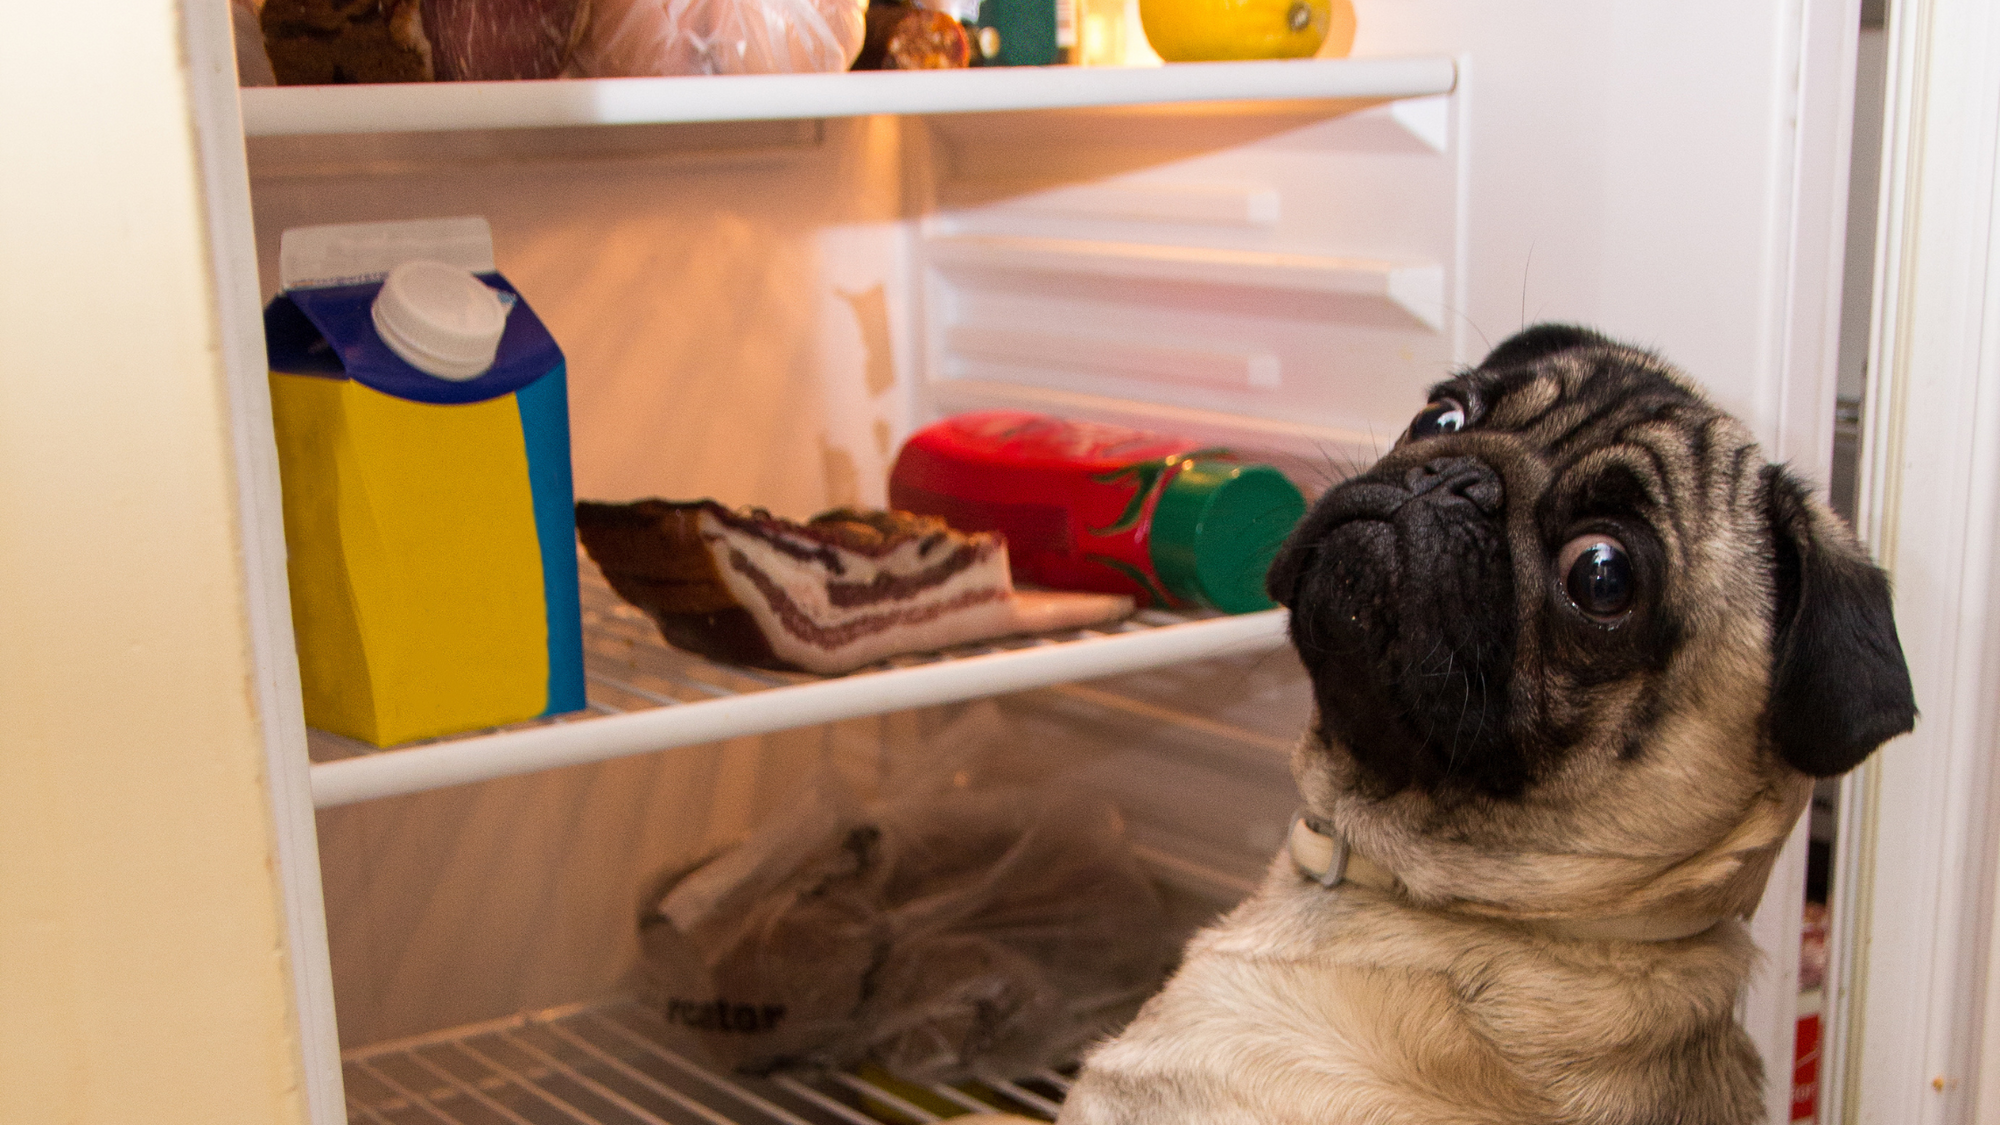 pug looking into the fridge with a funny expression